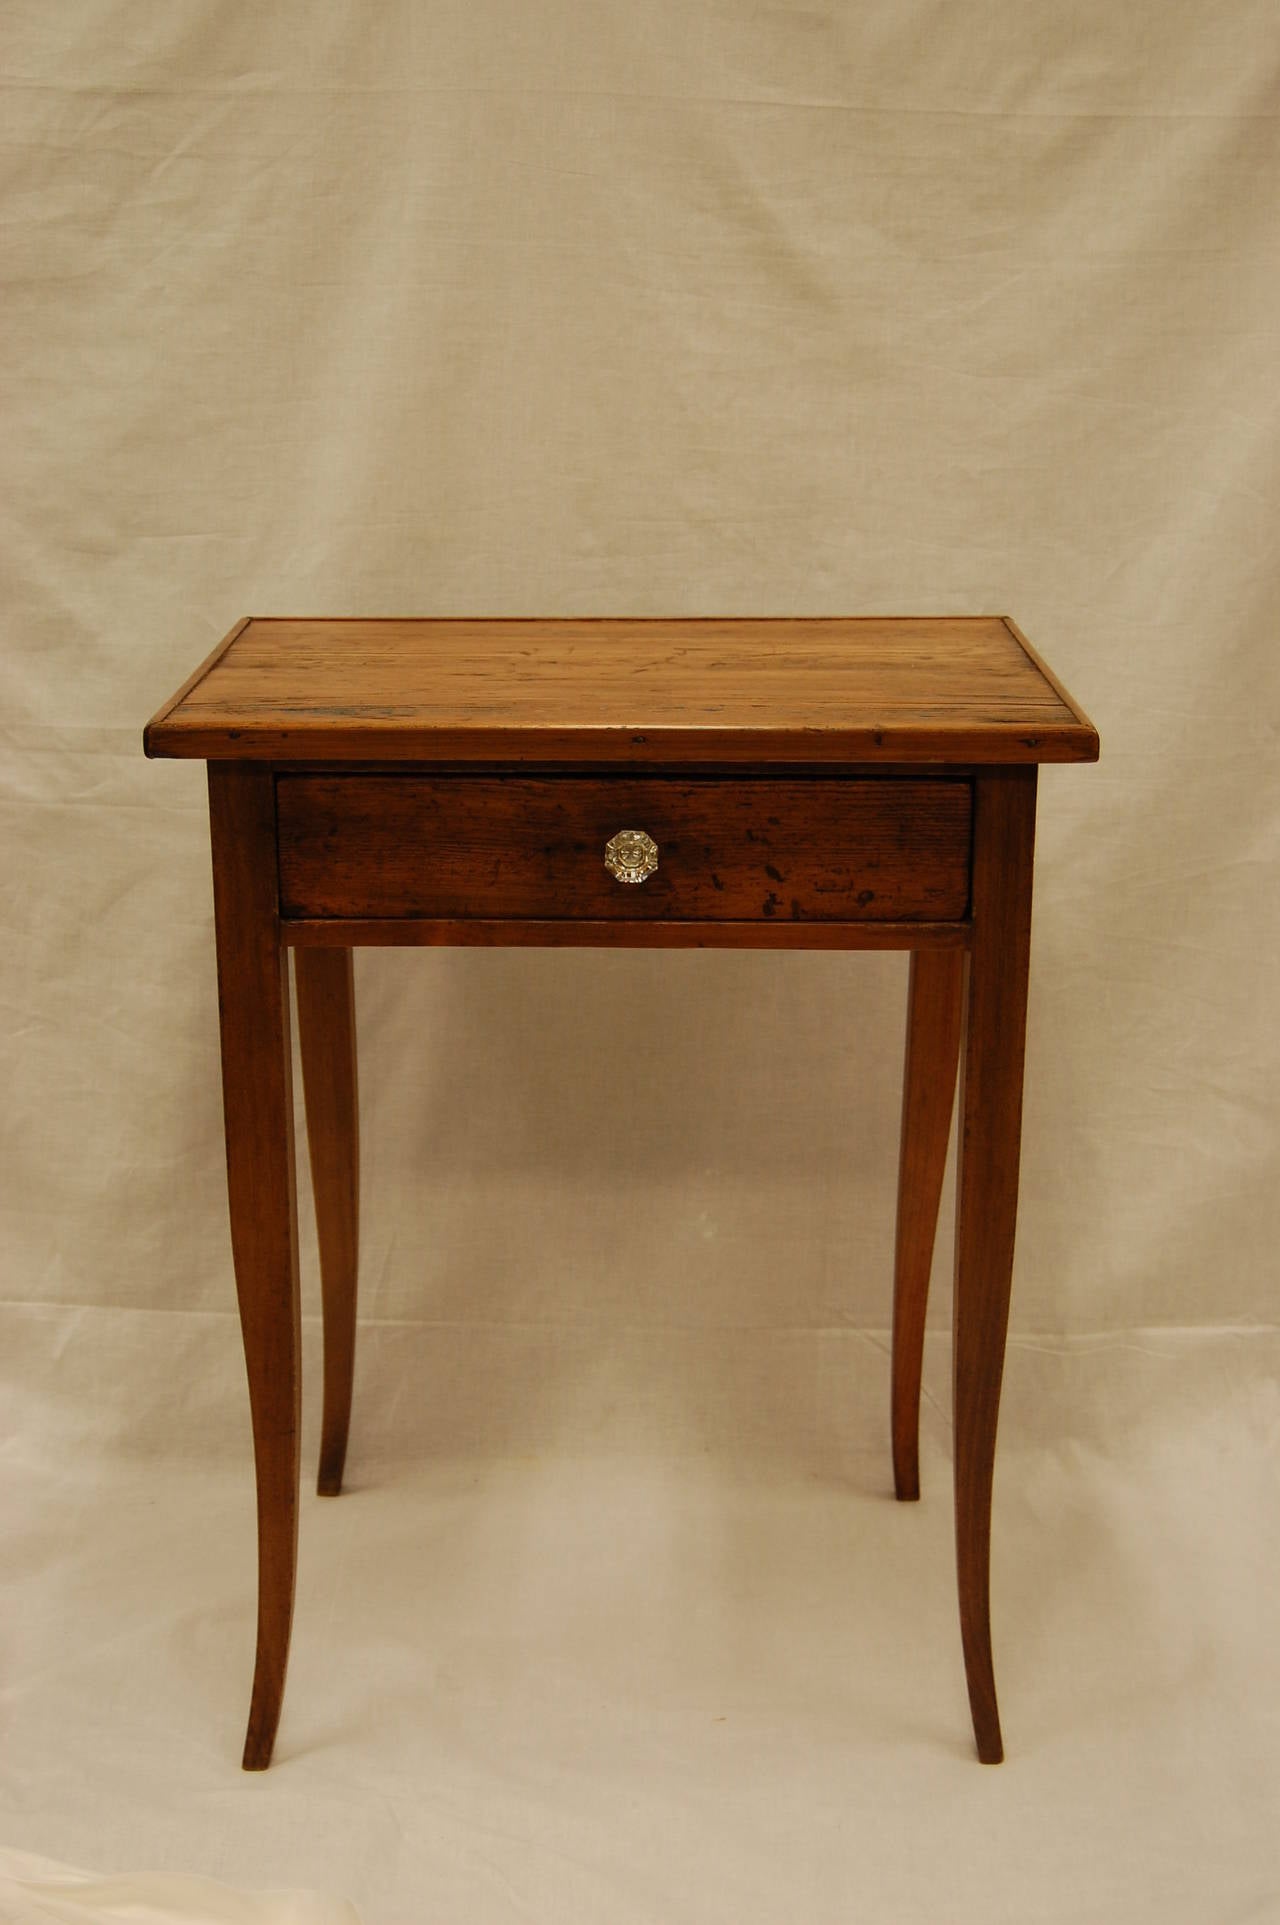 Stained Knotty Pine Side Table with Drawer, 19th Century